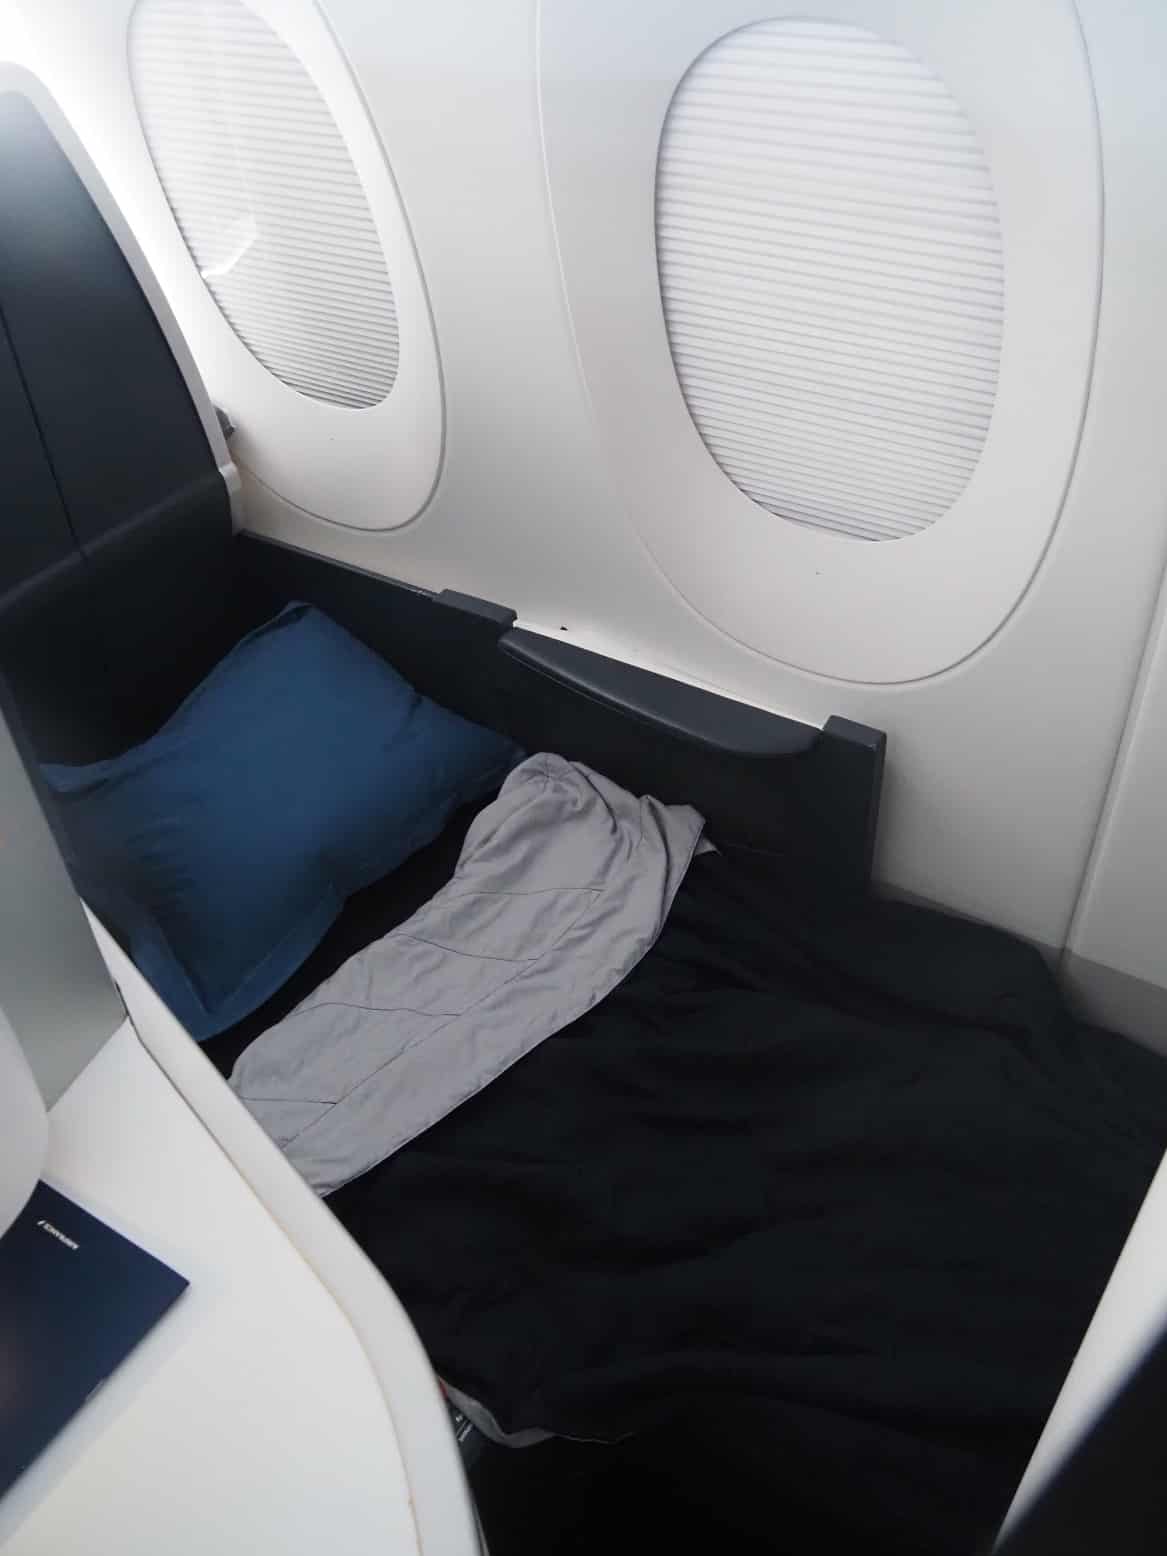 Air France Selects New Business Class Seat for its A350 Aircraft 